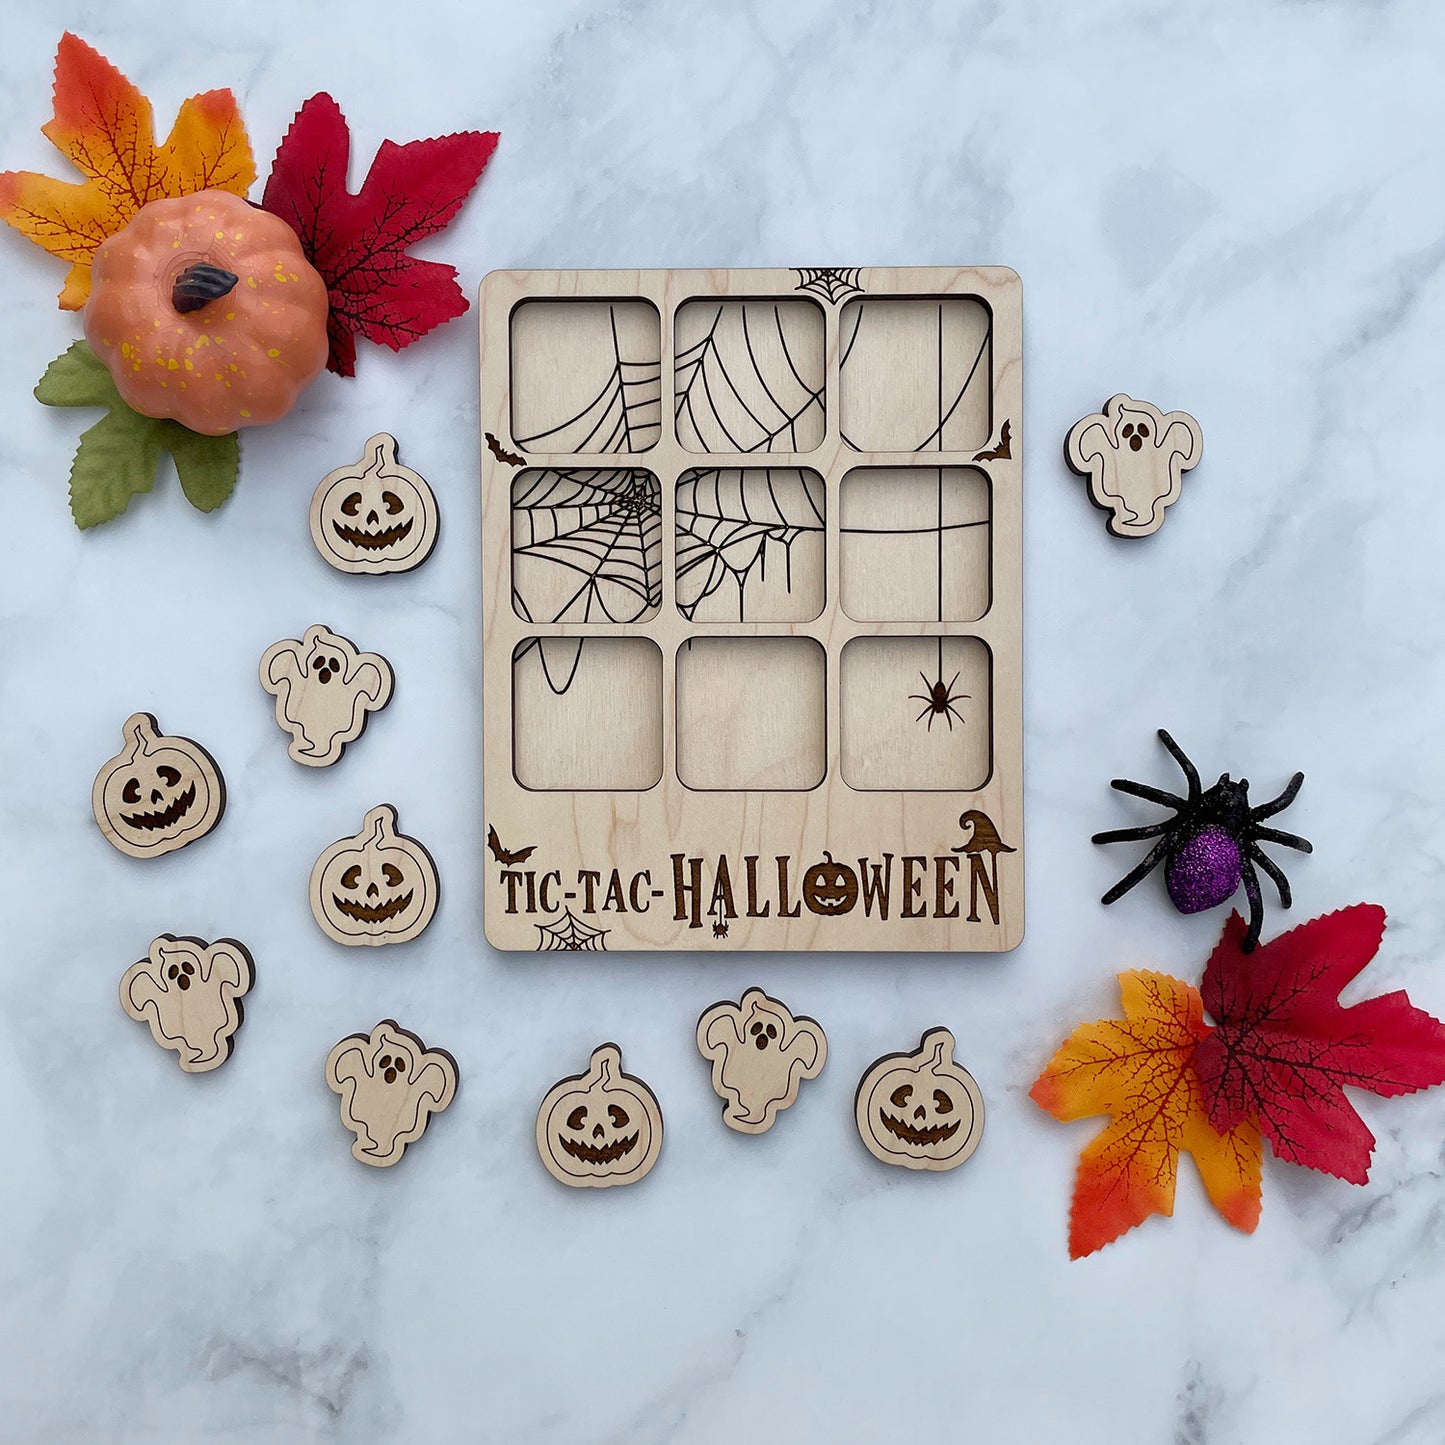 Personalizable Halloween Tic Tac Toe Game for Kids - Ghostly Tic Tac Toe for Children